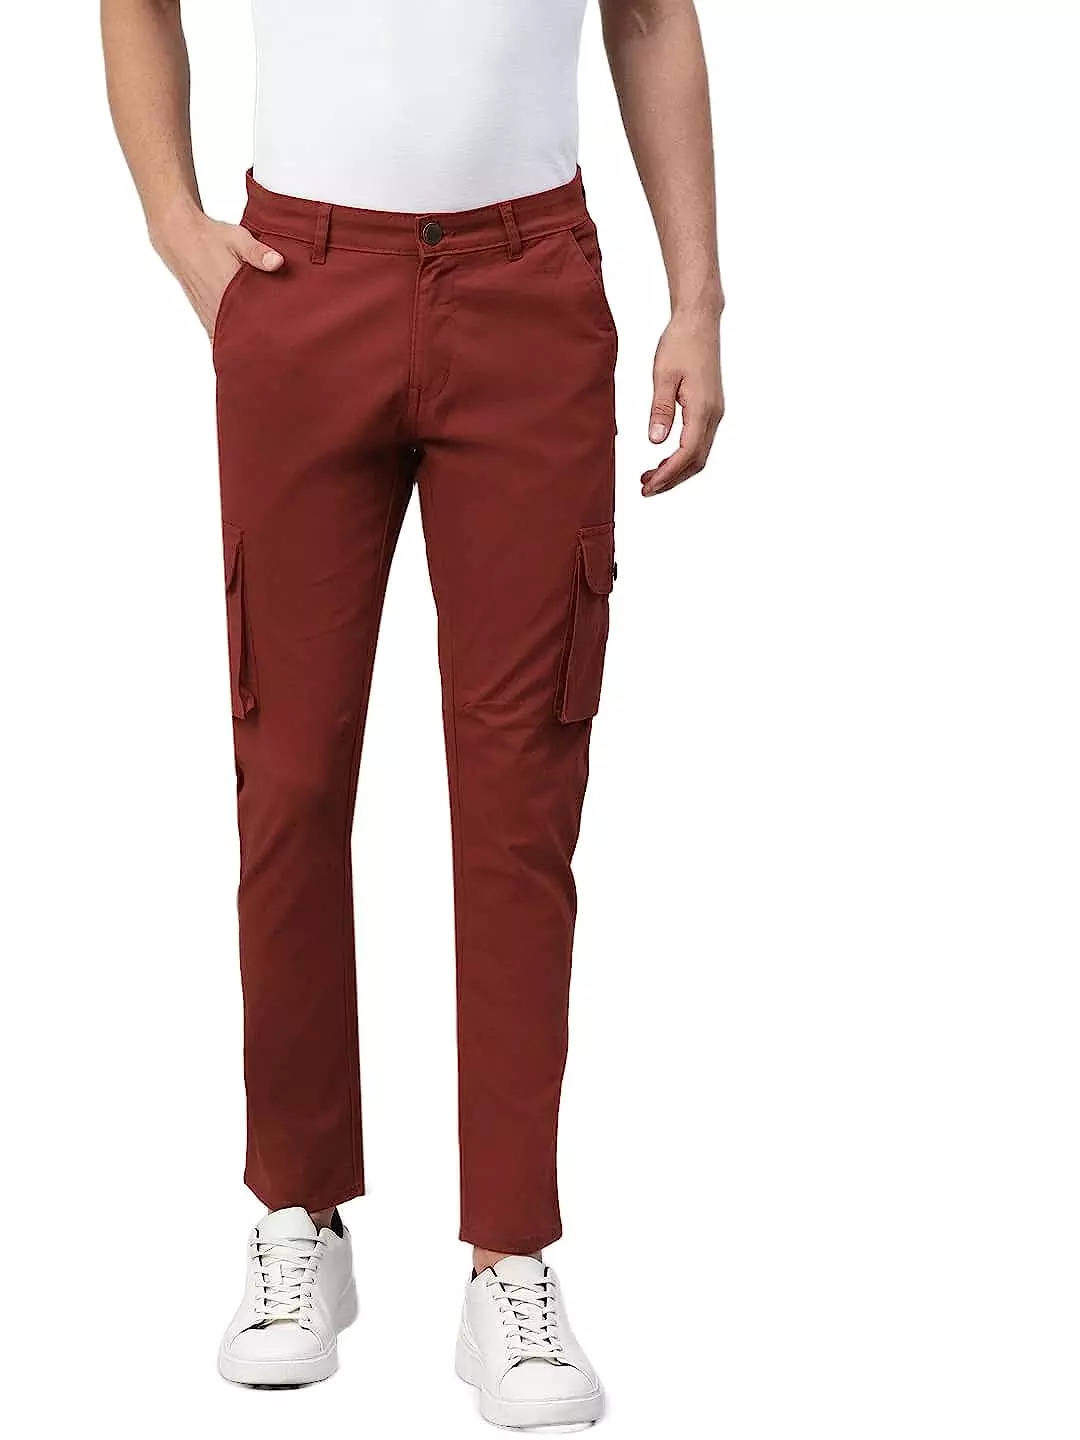 Men Relaxed Fit Dance Cargo Trousers - Aaron – The Dance Bible